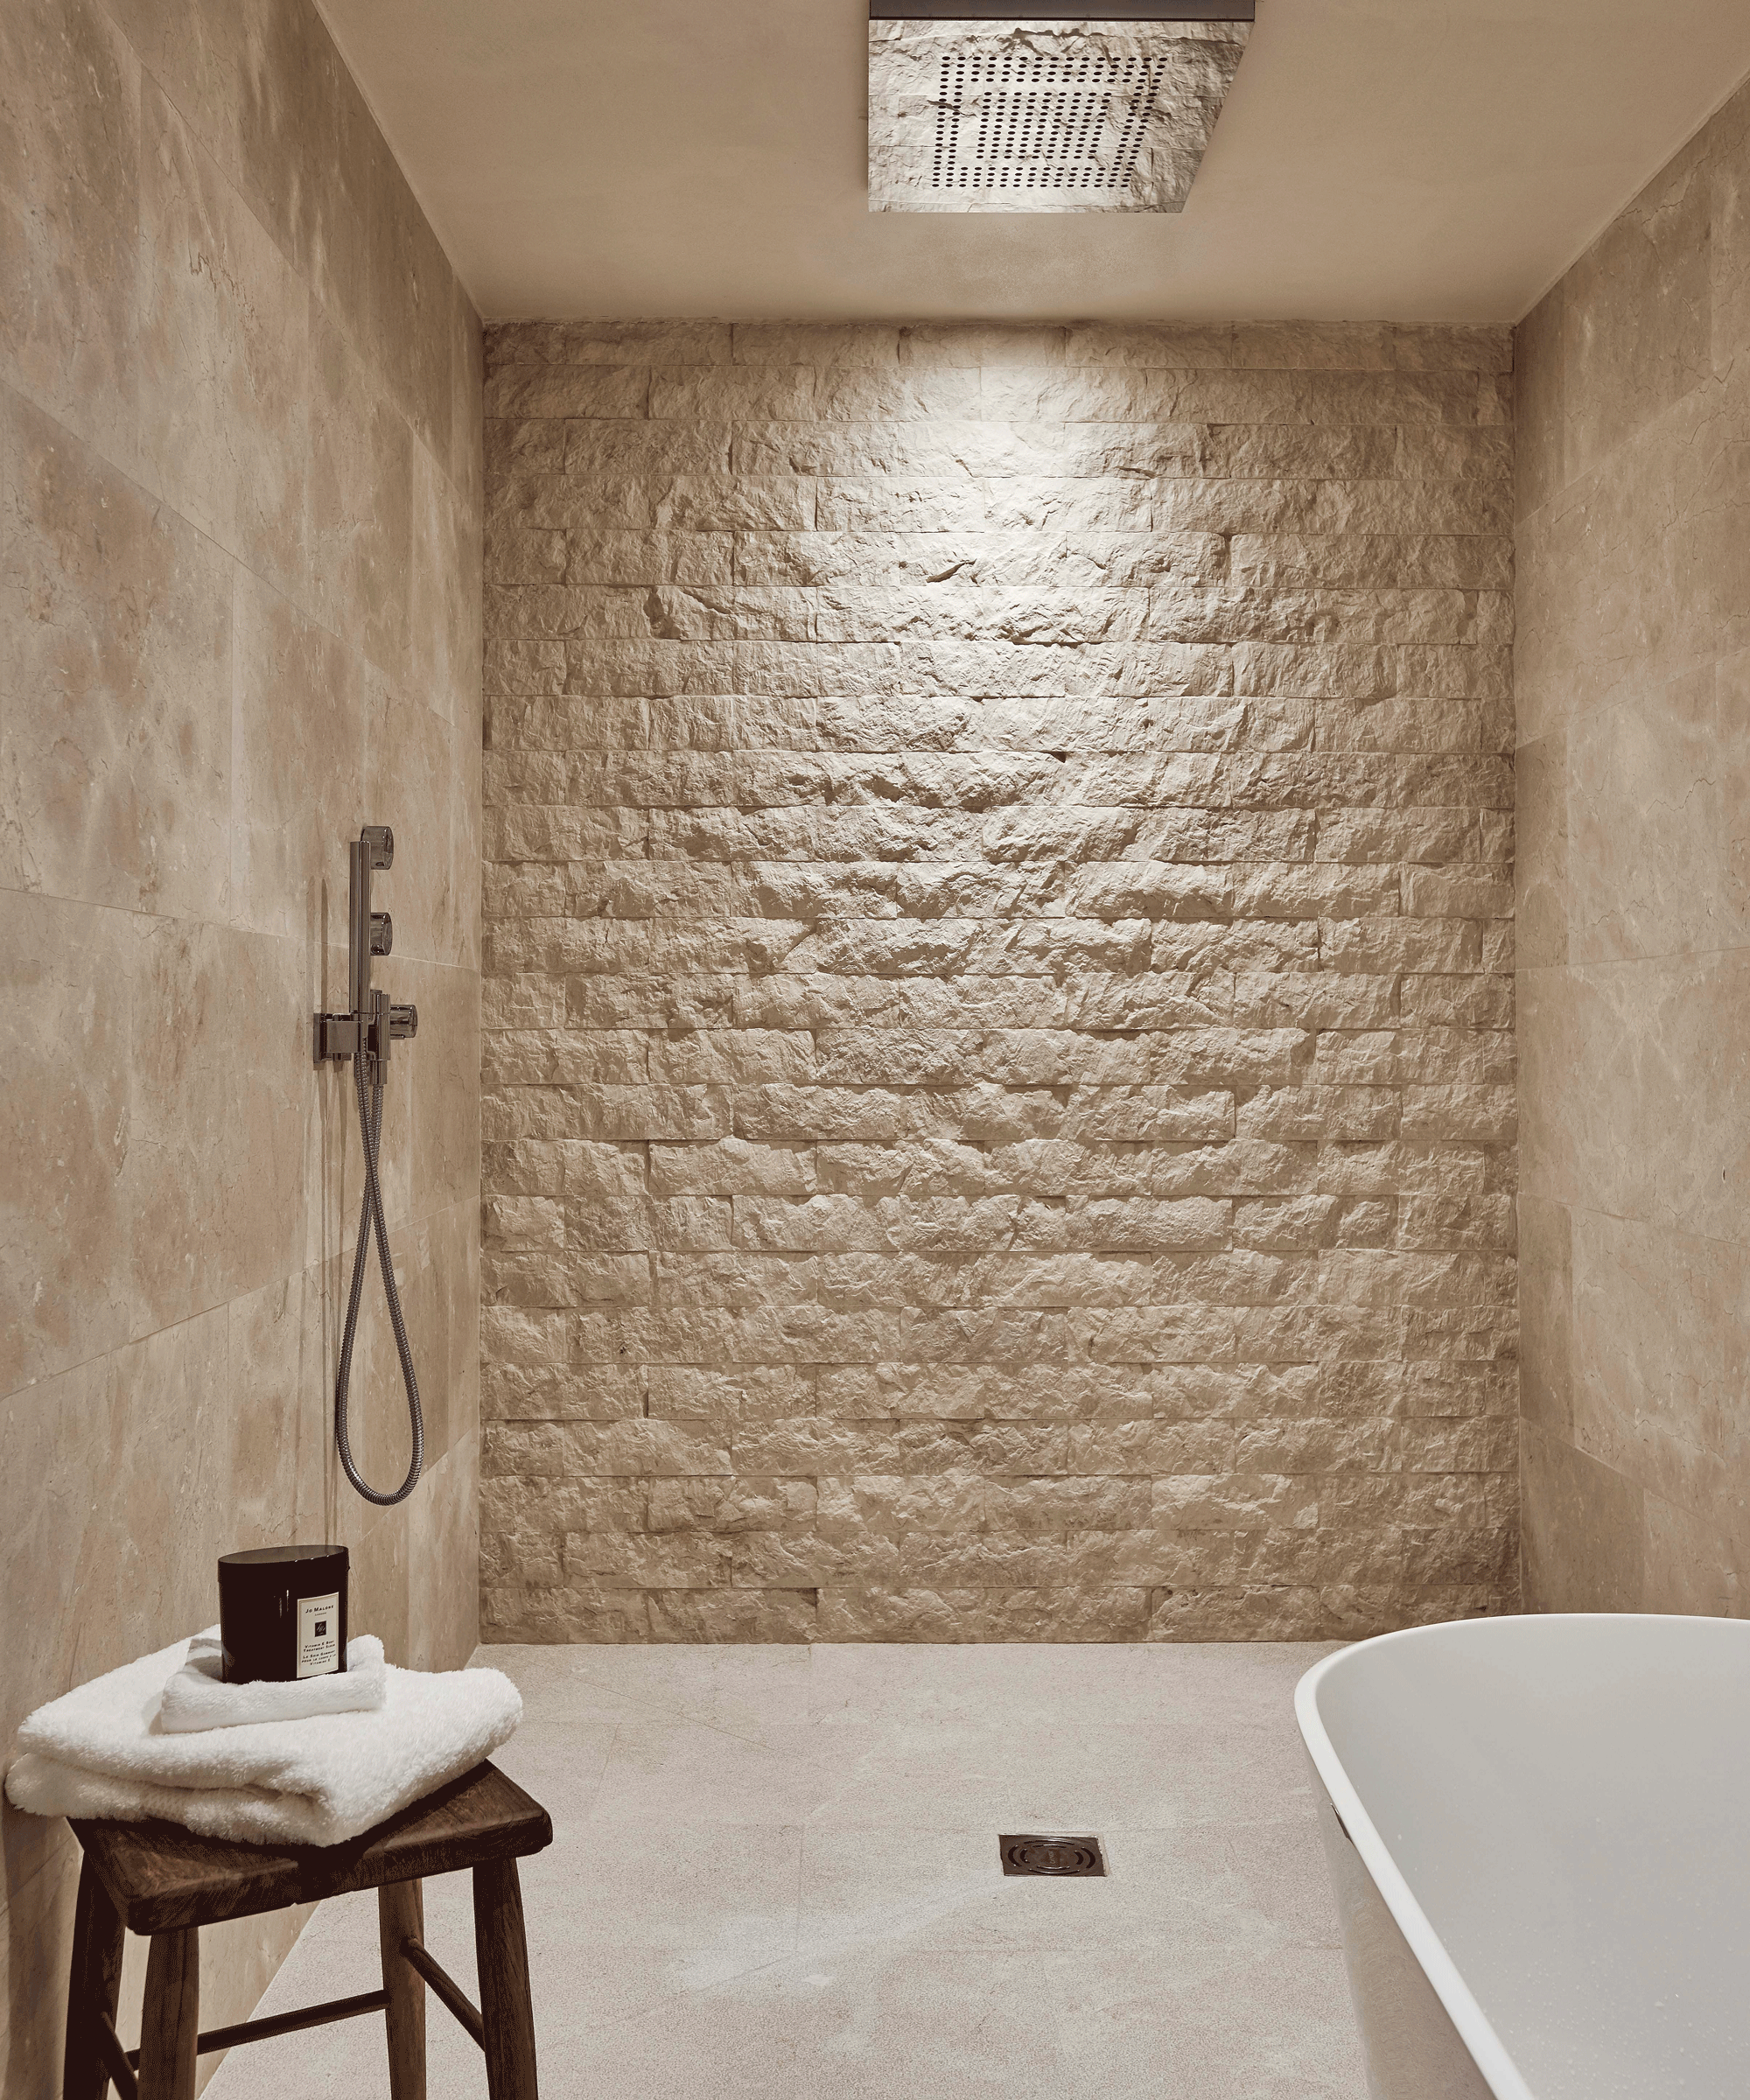 Wet room with brick wall focal point